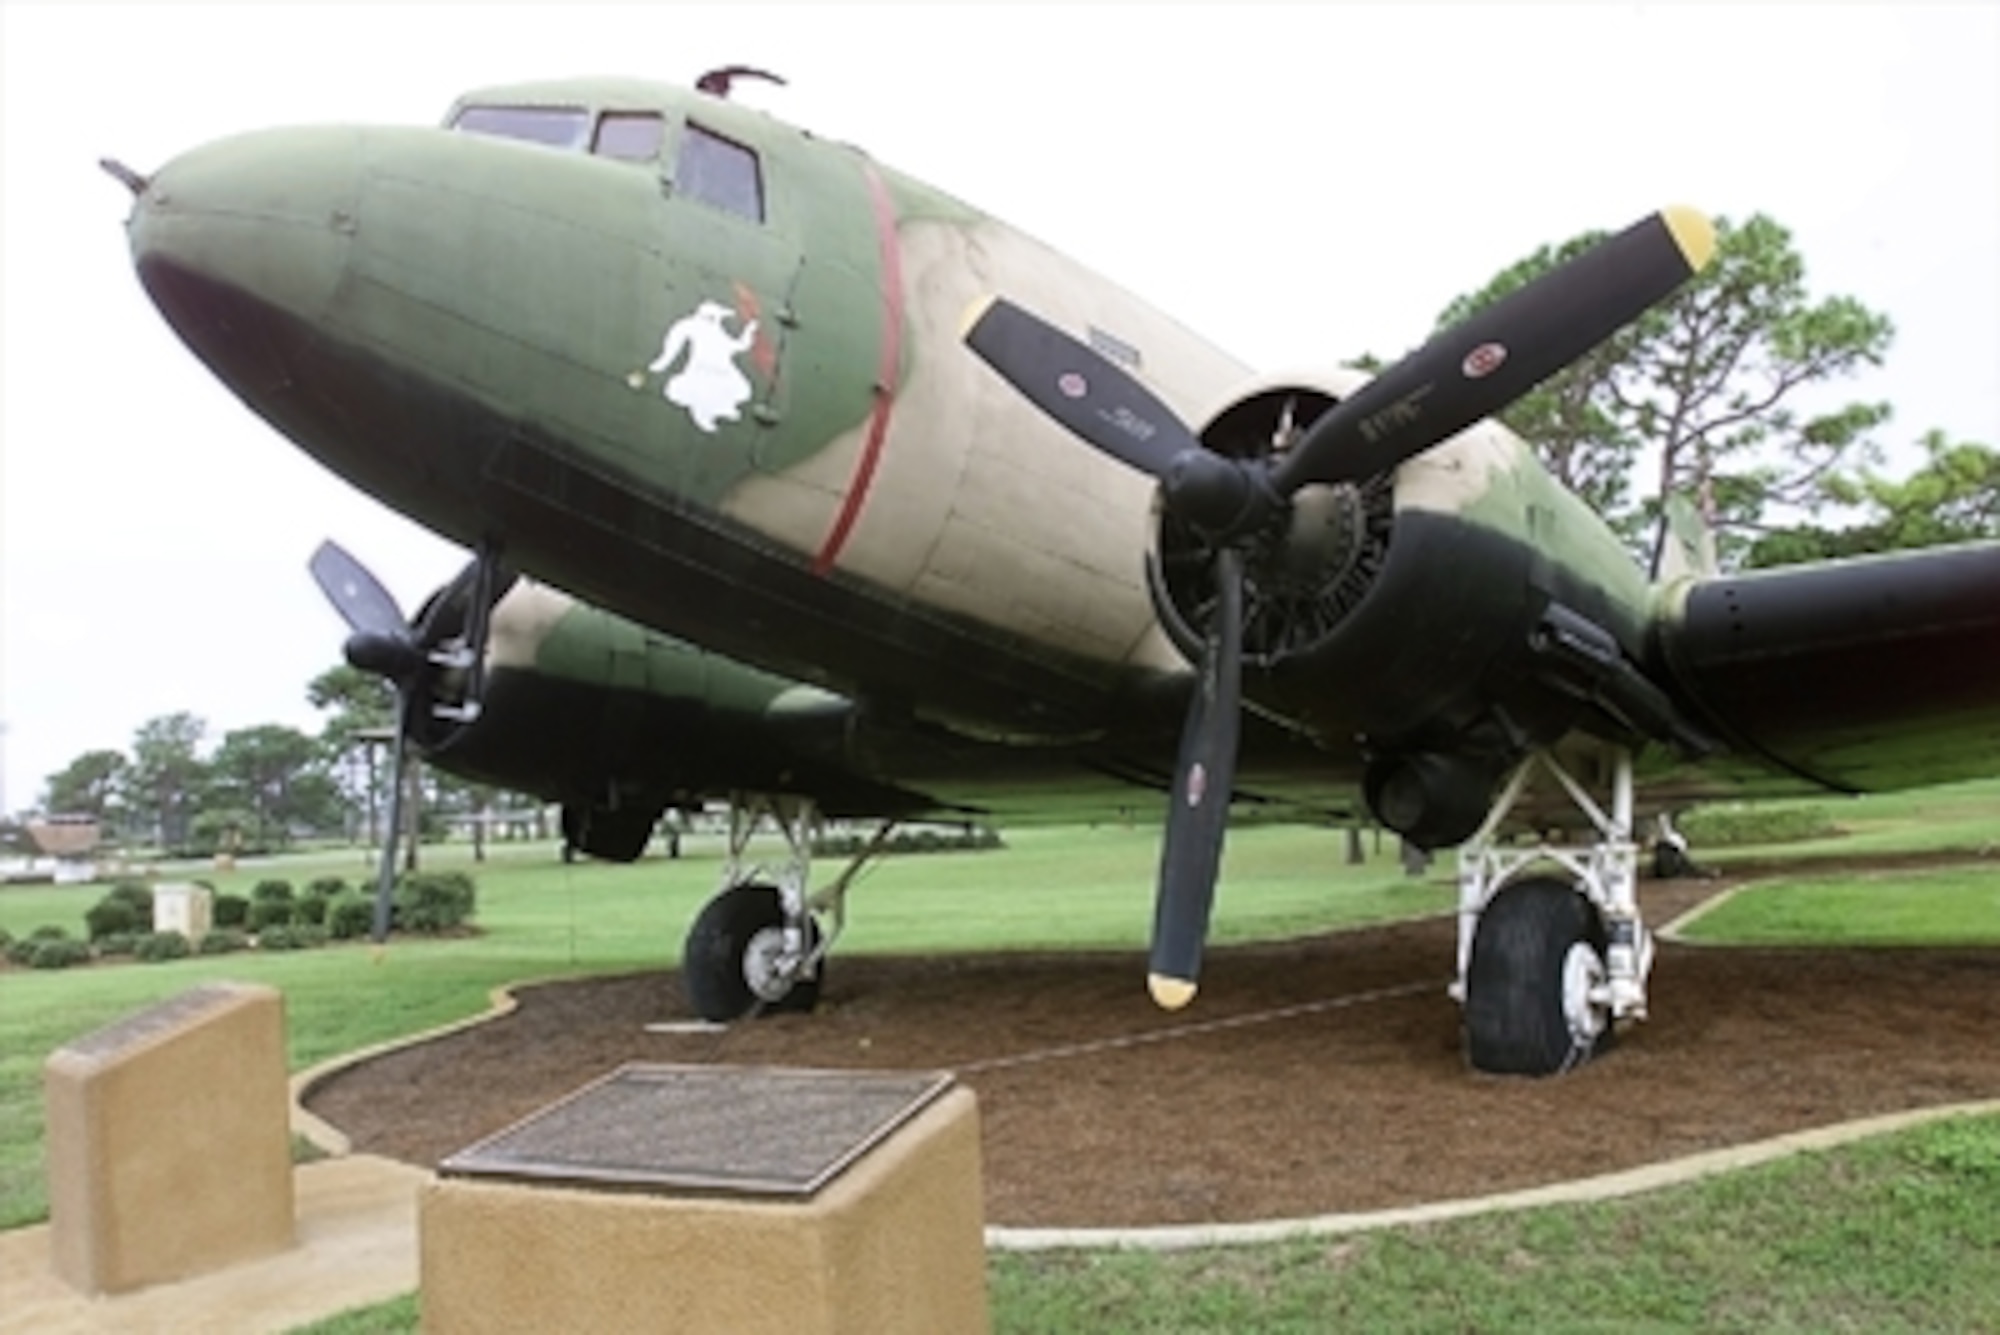 The C-47 Skytrain, Gooney Bird or Dakota, regardless of its nickname, was quite probably the most successful aircraft ever developed. Approximately 13,000 C-47 variants were produced including more than 2,000 built in foreign countries under license. At one time the DC-3 or C-47 was in service in more than 40 countries.